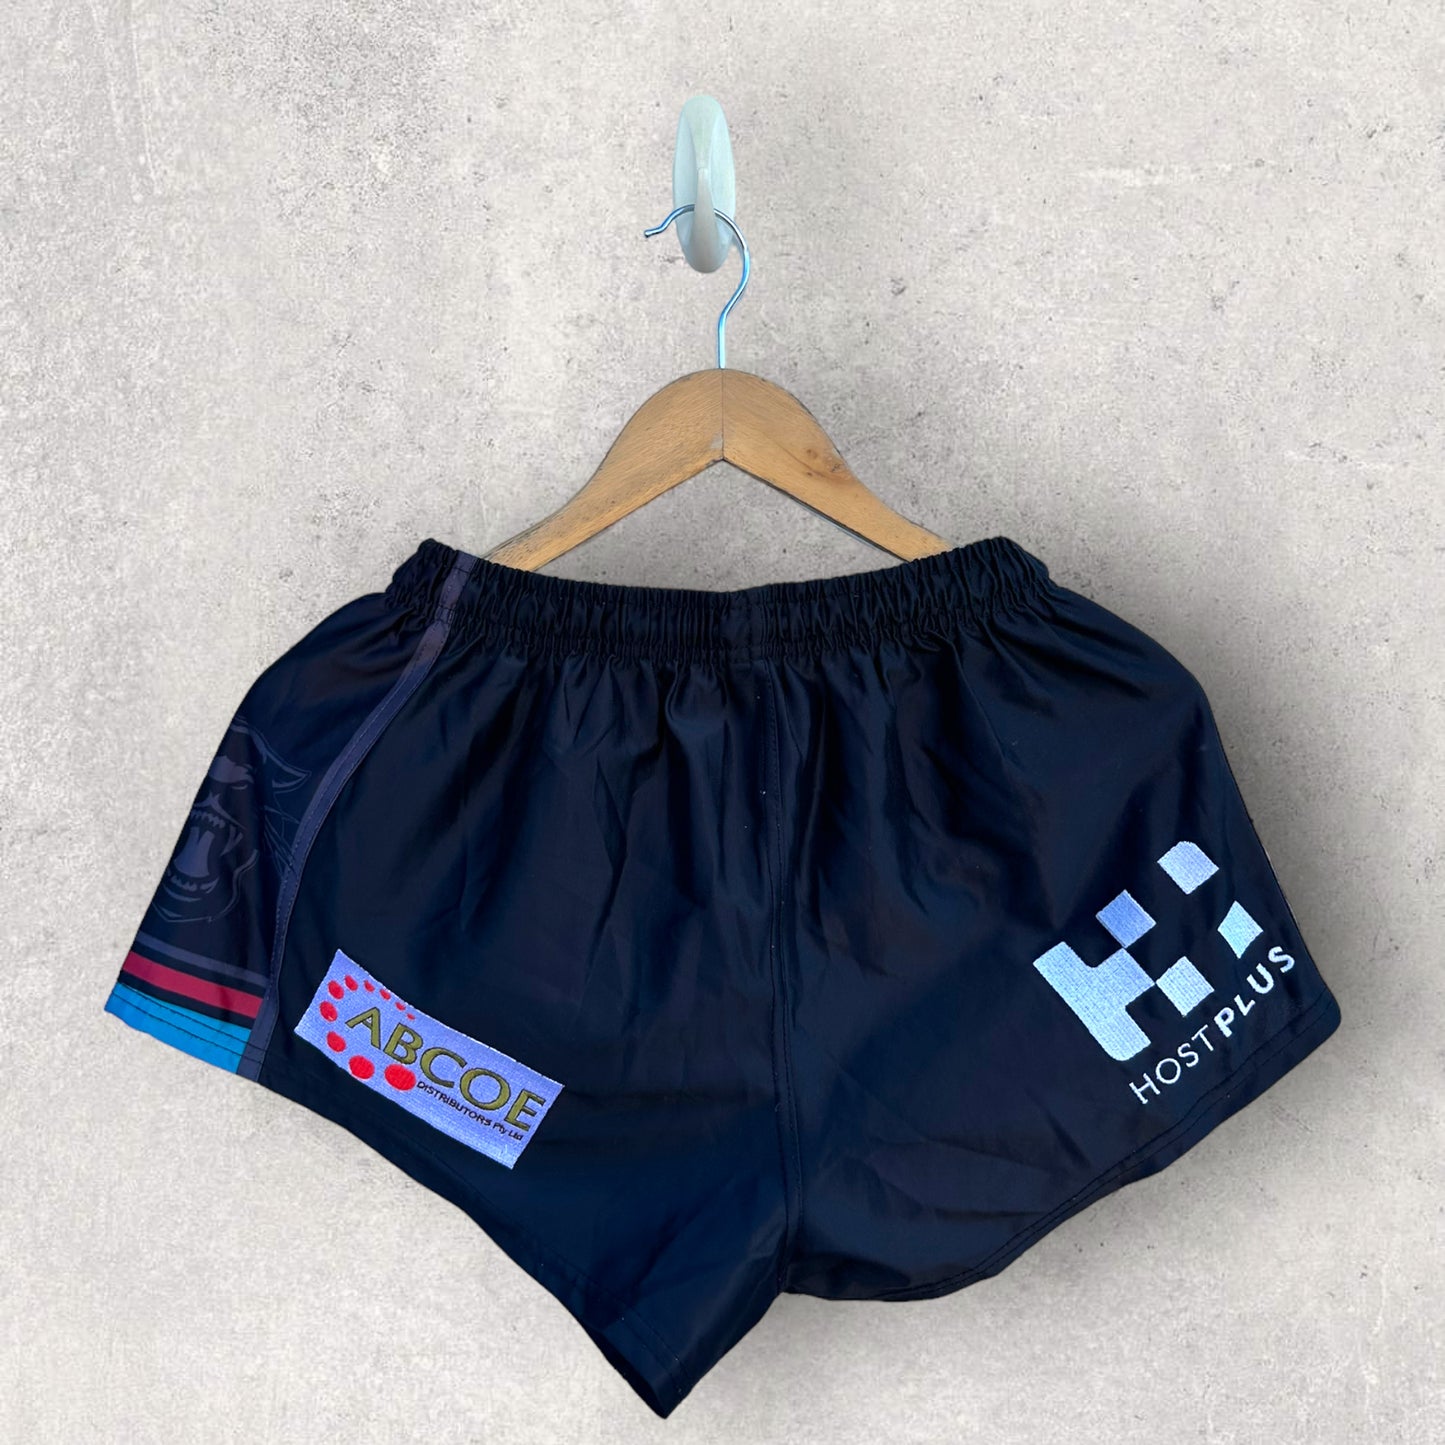 PANTHERS ISC PLAYER ISSUED SHORTS